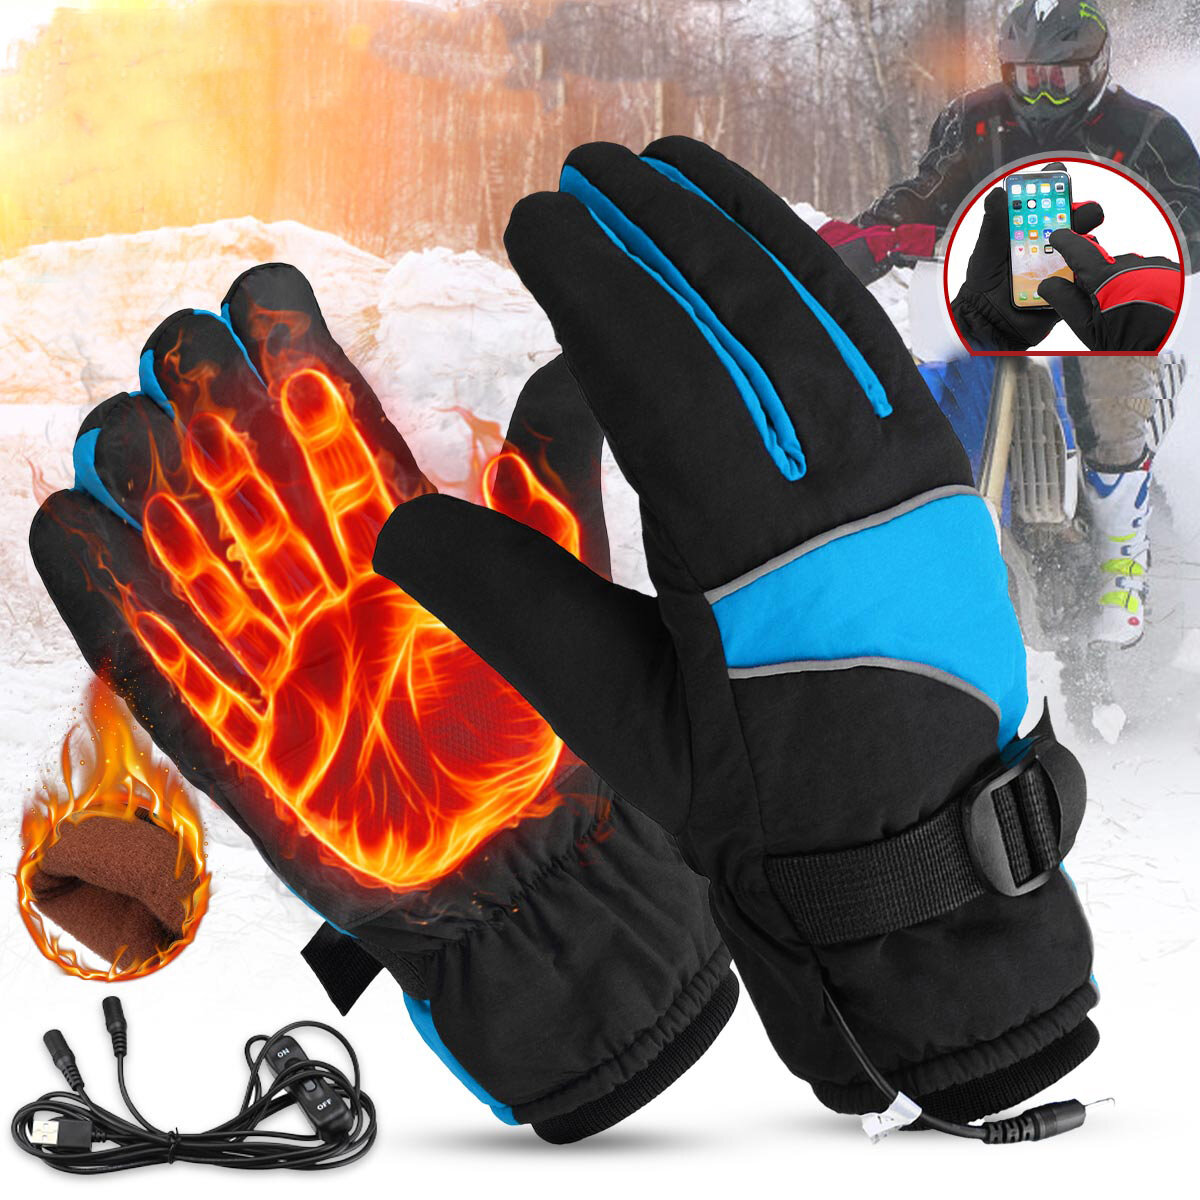 12V Winter Warm Electric Heated Gloves Touch Screen USB Charging Motorcycle Waterproof Gloves Skiing Windproof Gloves